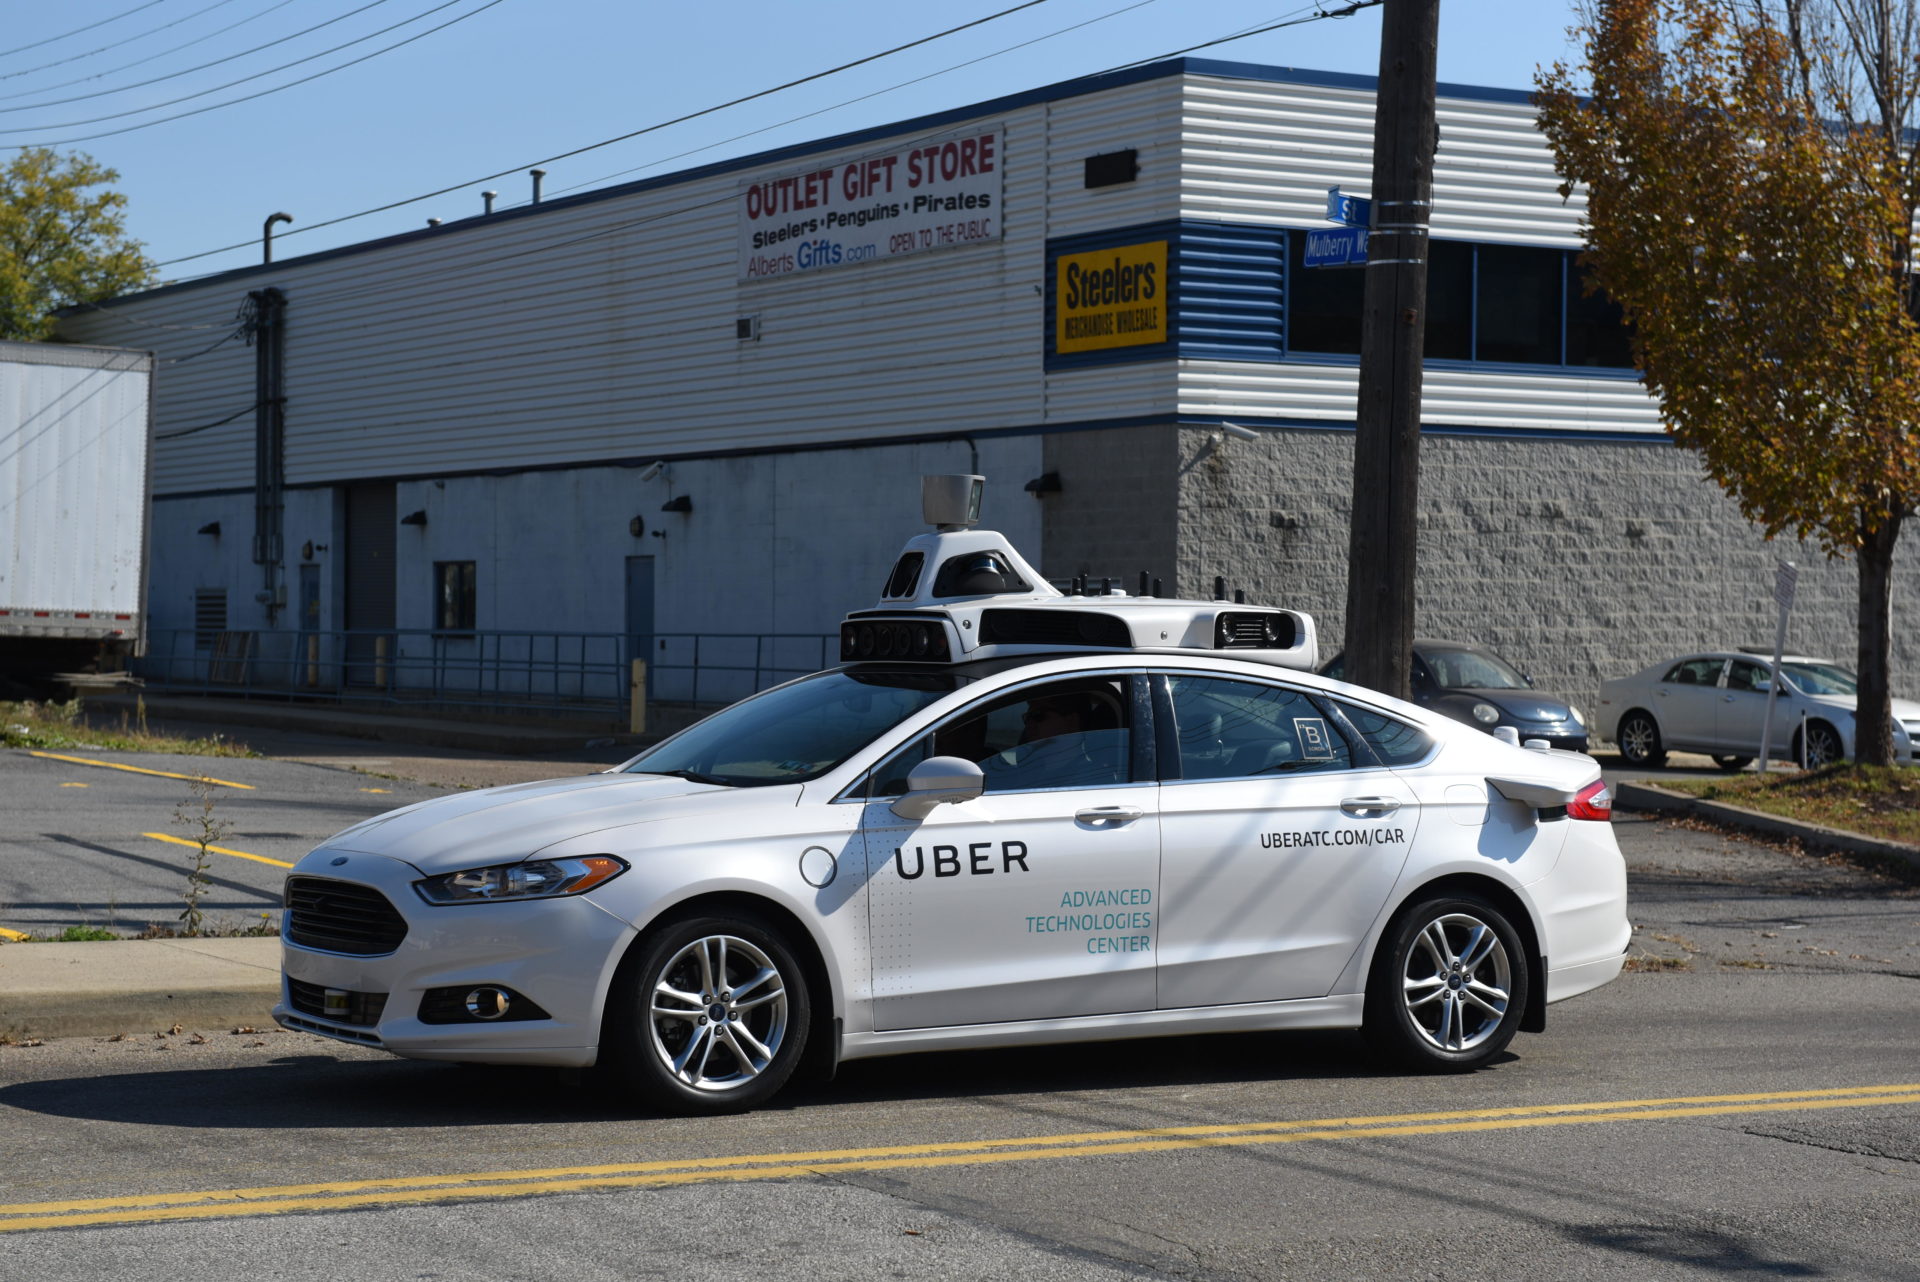 A self-driving car being tested by Uber in Pittsburgh, PA. Image: Michael Ventura / Alamy Stock Photo